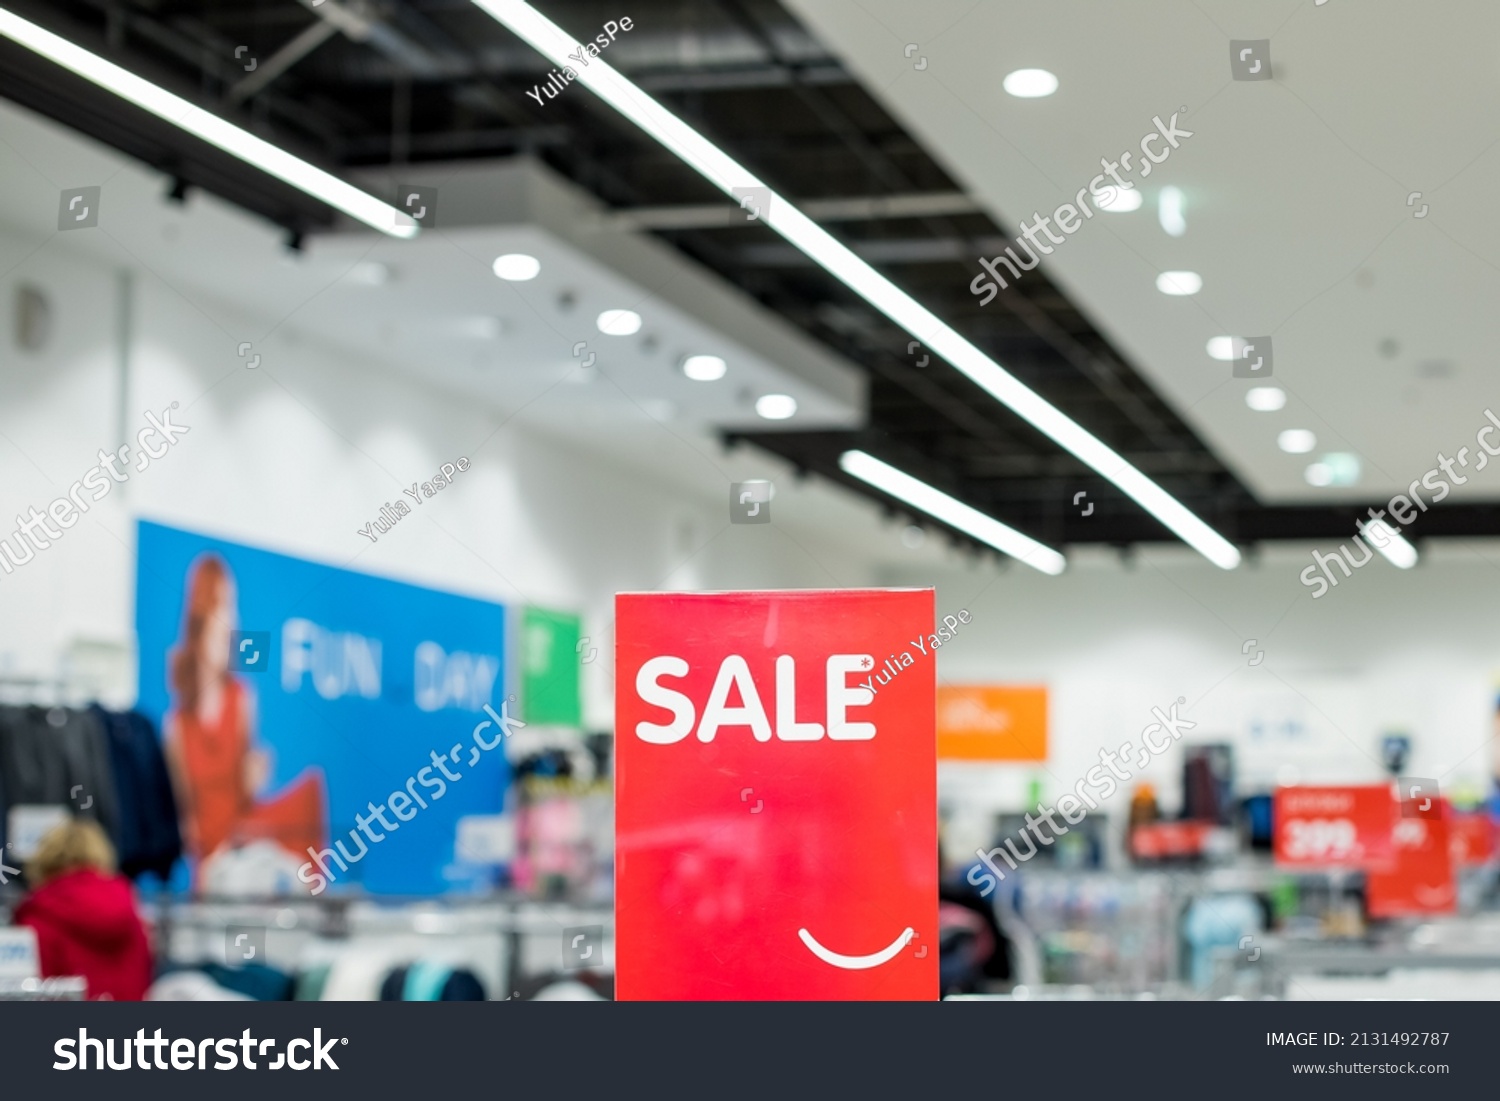 A sign with the inscription SALE in white on a red background in the trading floor of casual clothing store. Fashion concept, discount season, black friday, offline shopping, gimmicks, holiday sales. #2131492787